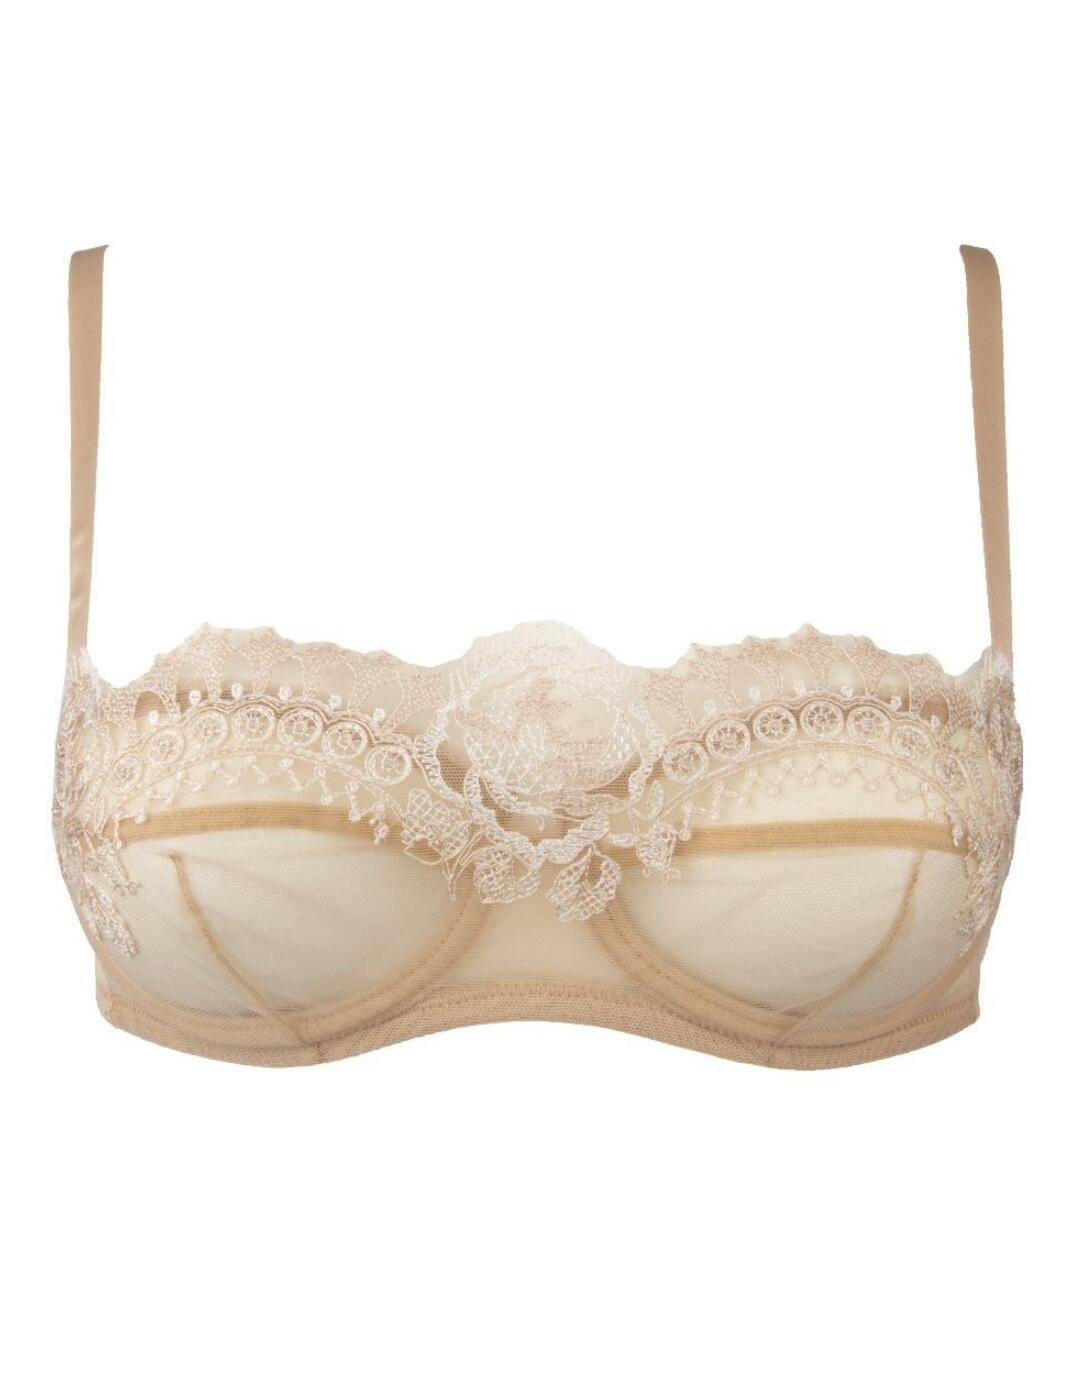 Lise Charmel Ecrin Glamour Half Cup Bra in Nude Glamour